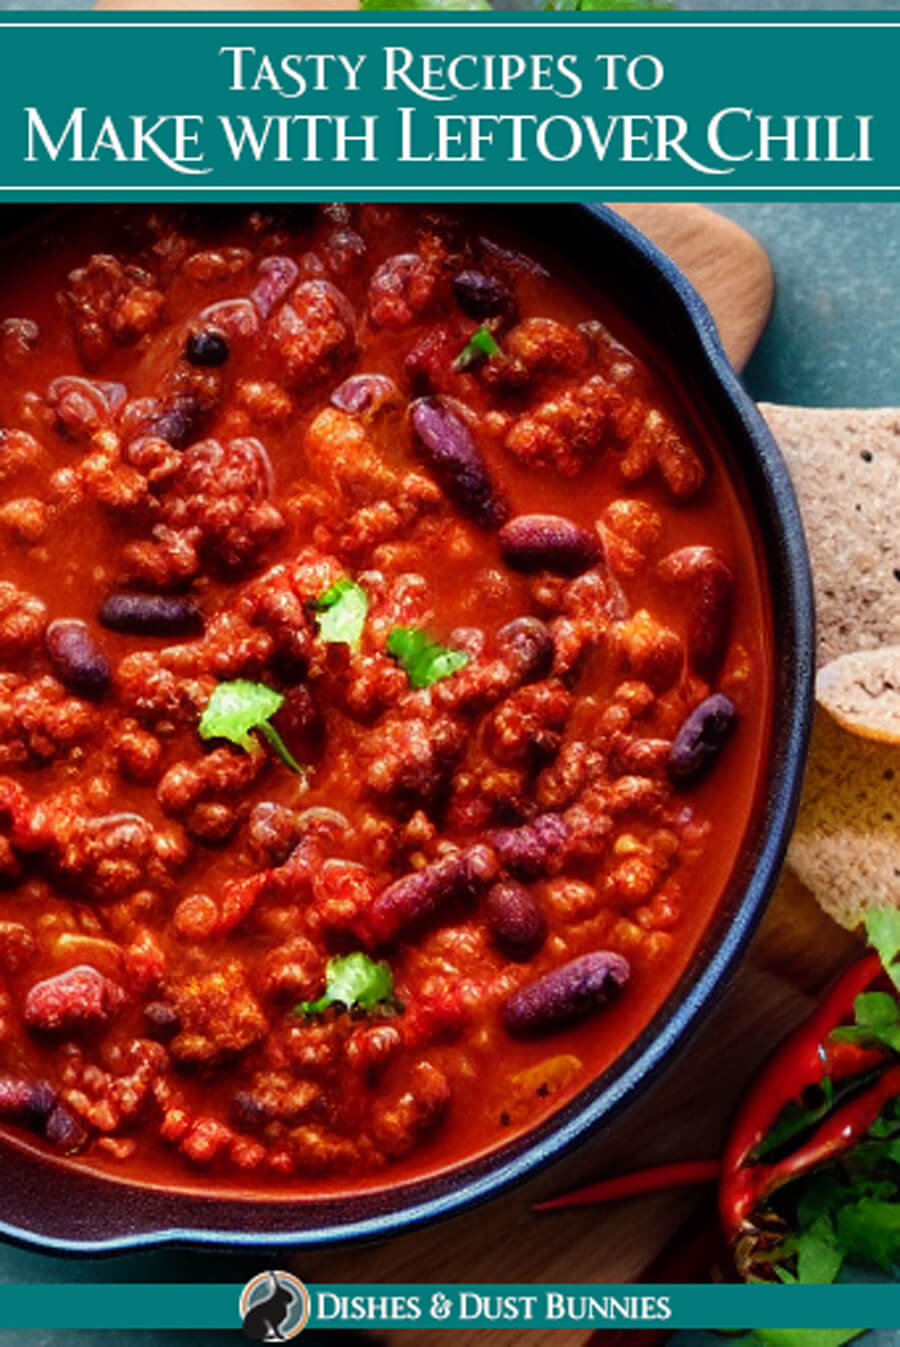 Tasty Recipes to Make with Leftover Chili